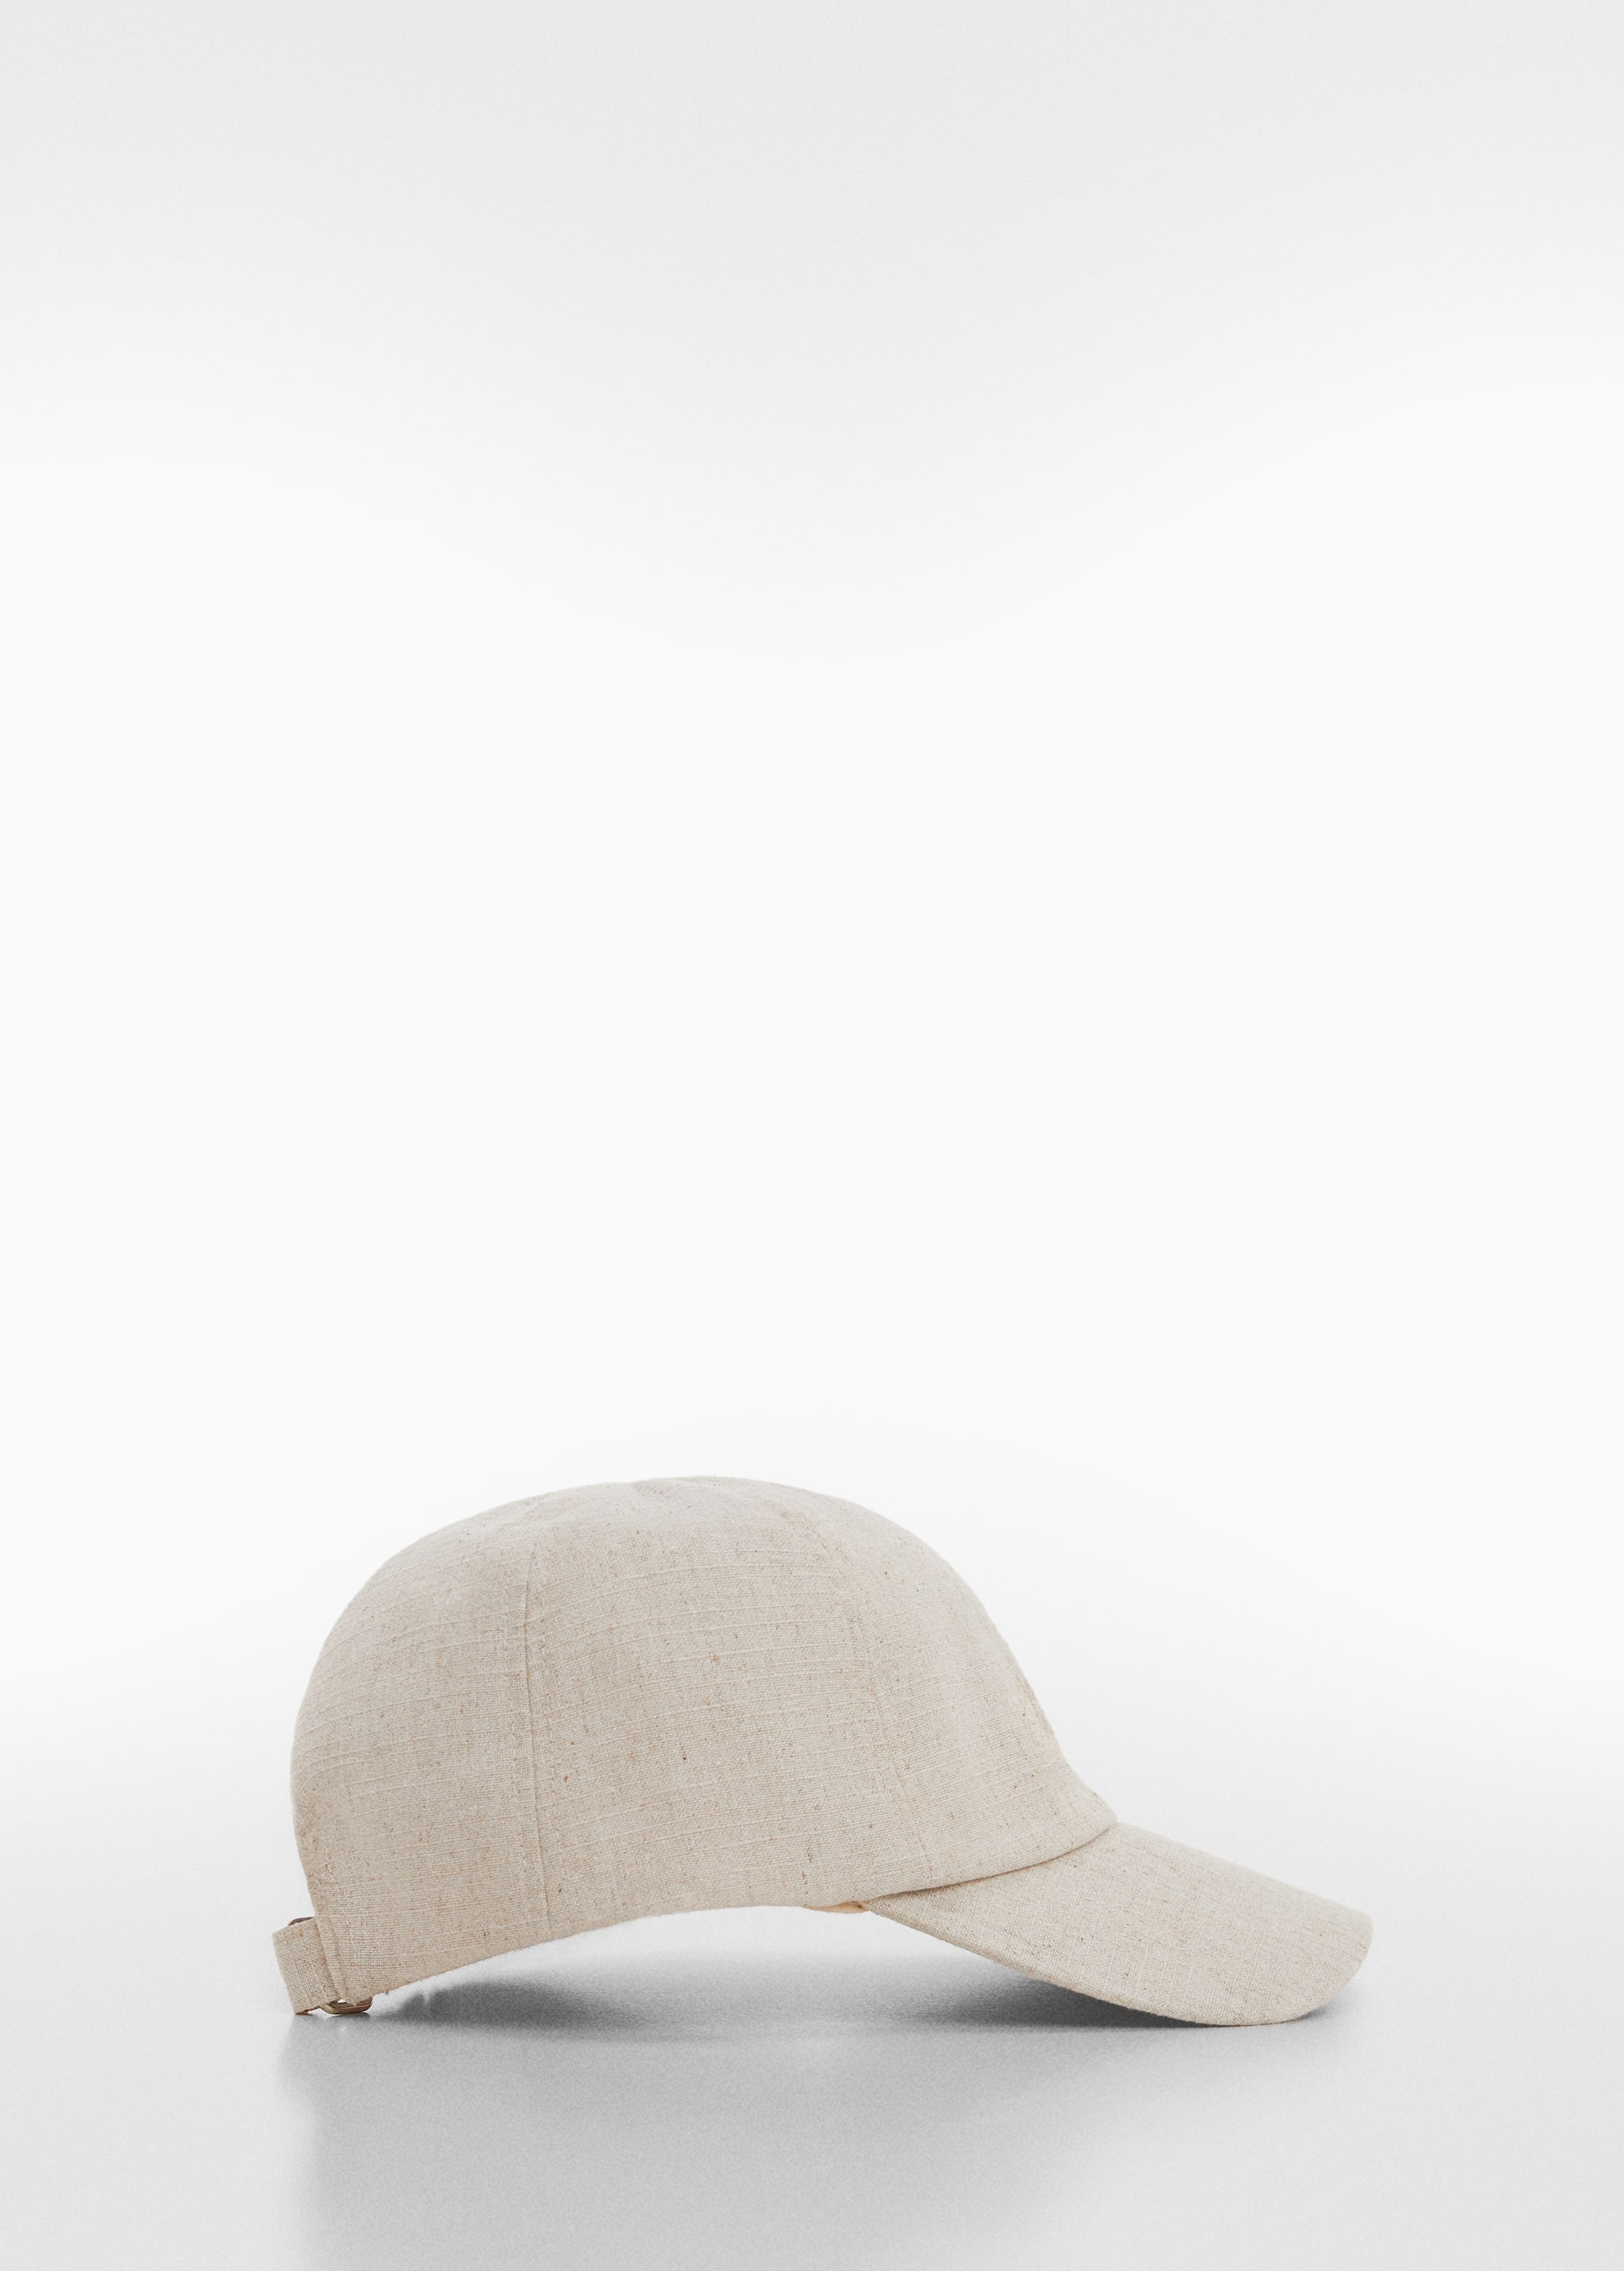 Embroidered cotton visor cap - Article without model